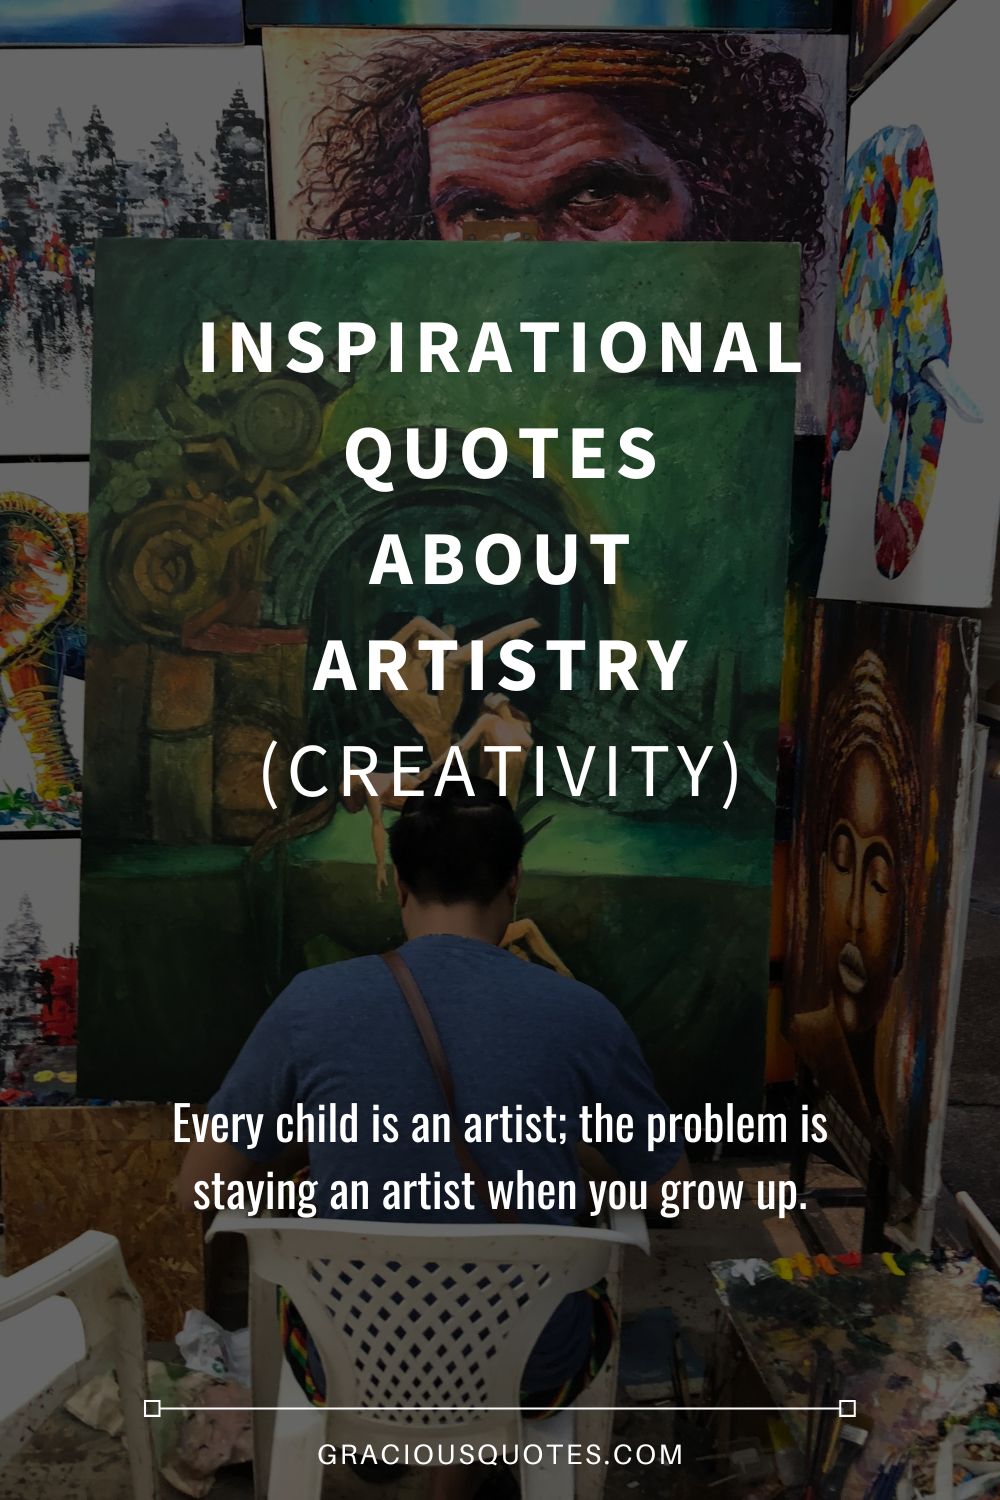 Inspirational Quotes About Artistry (CREATIVITY) - Gracious Quotes